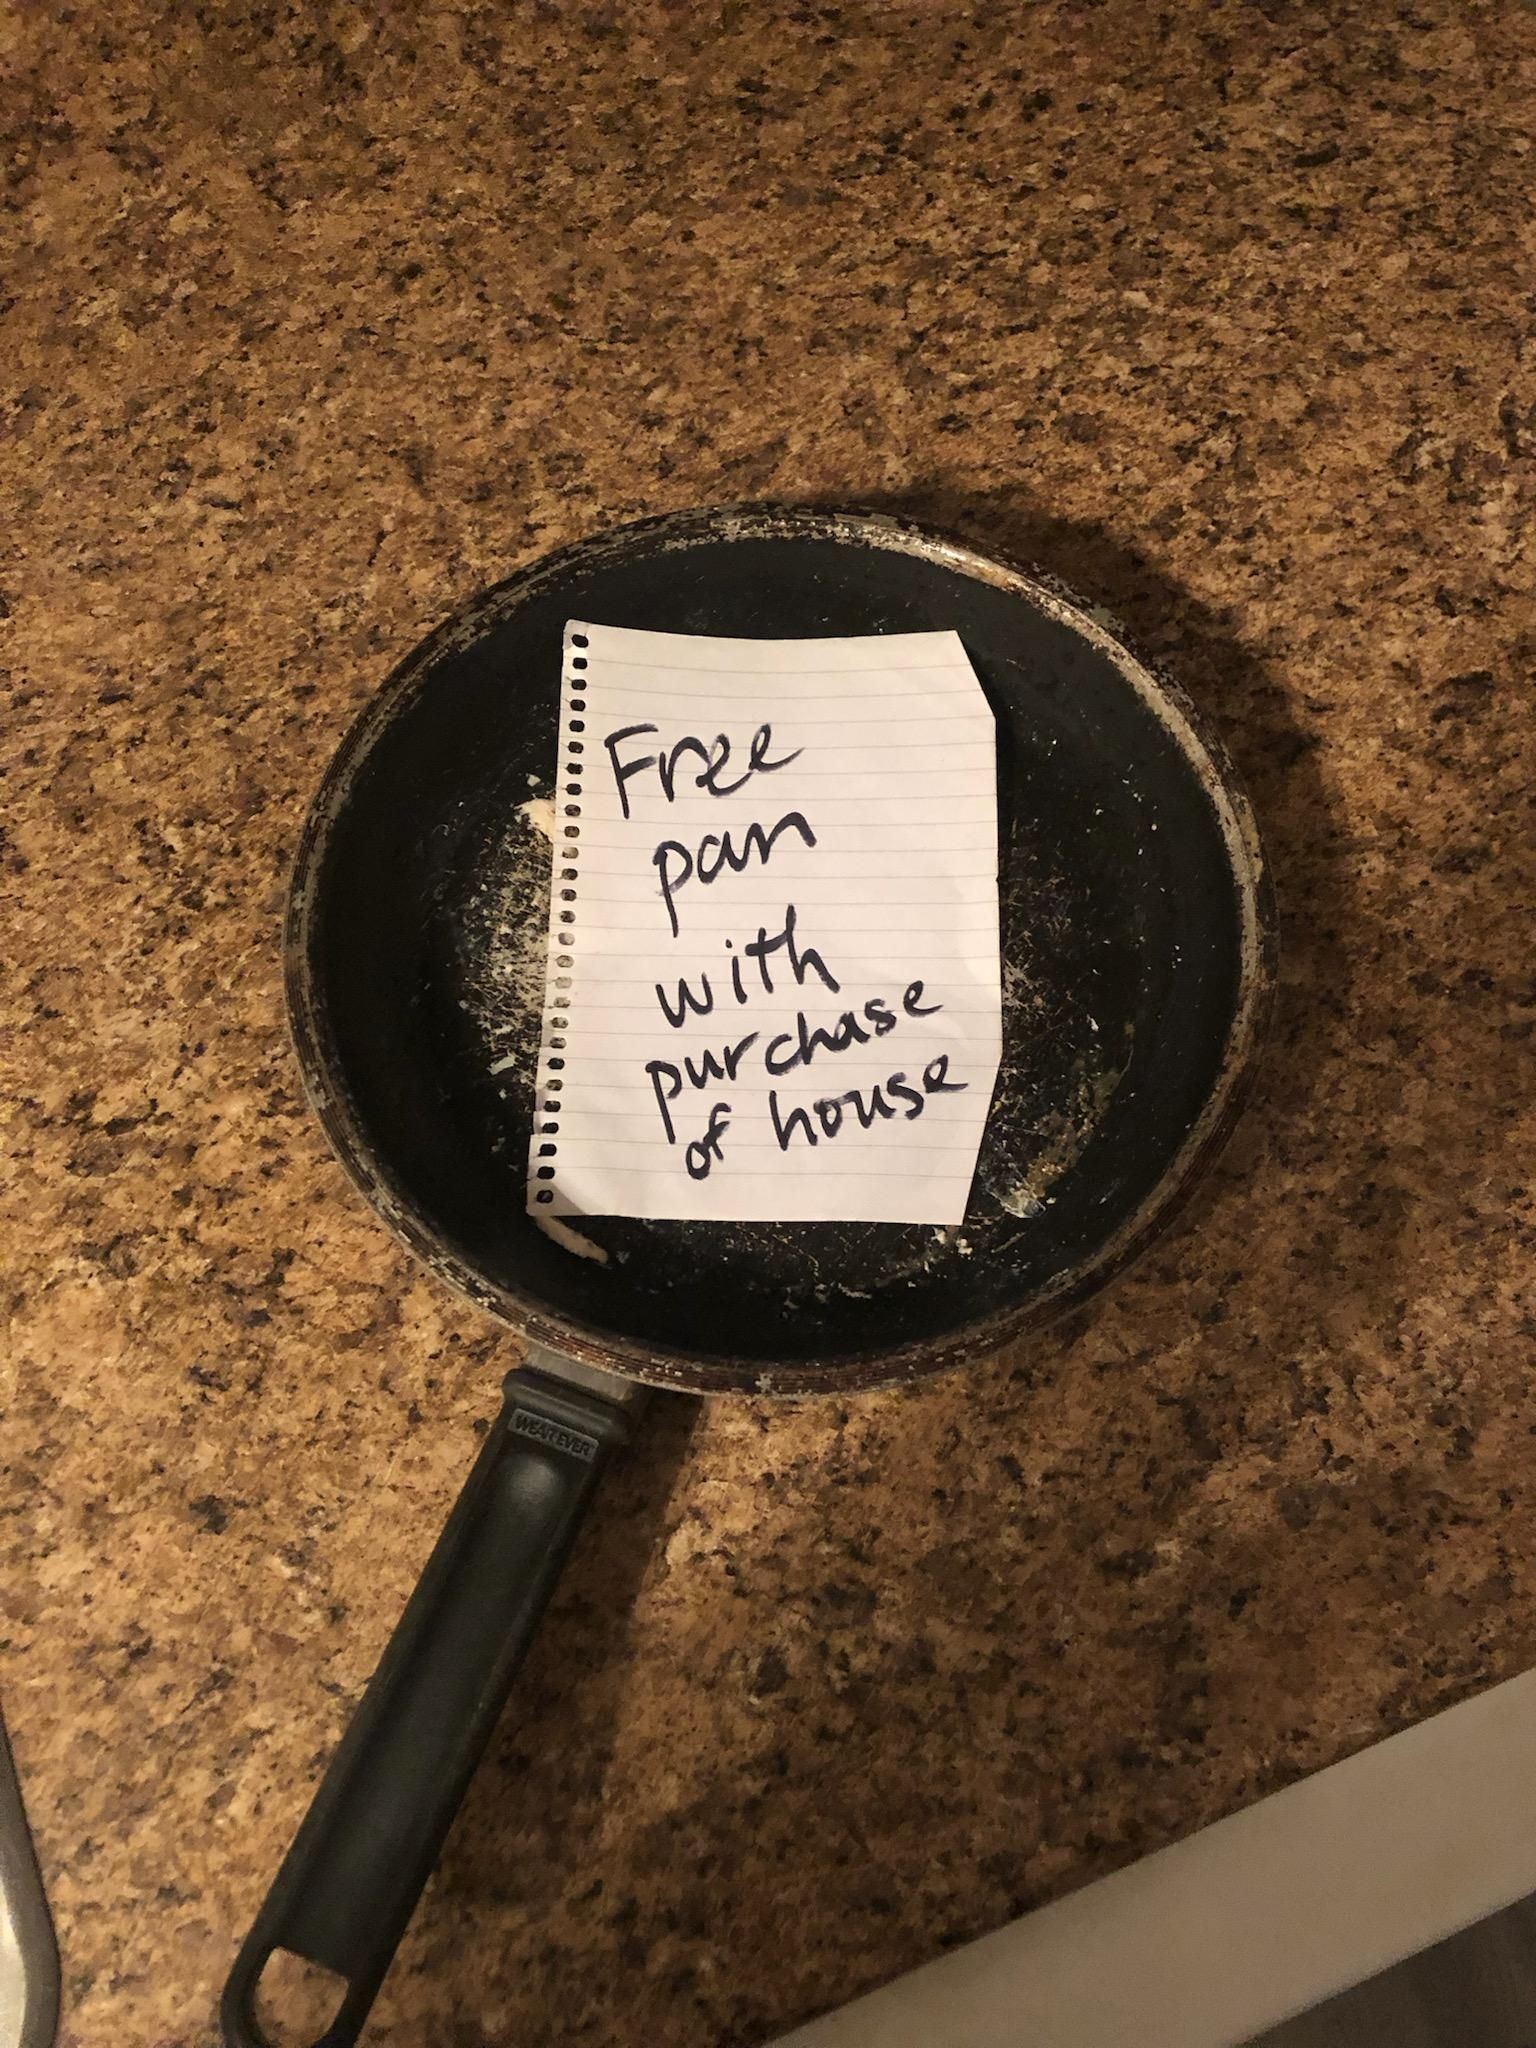 This is my GF's frying pan and I hate it. Her house goes on the market tomorrow. She just sent me this picture.